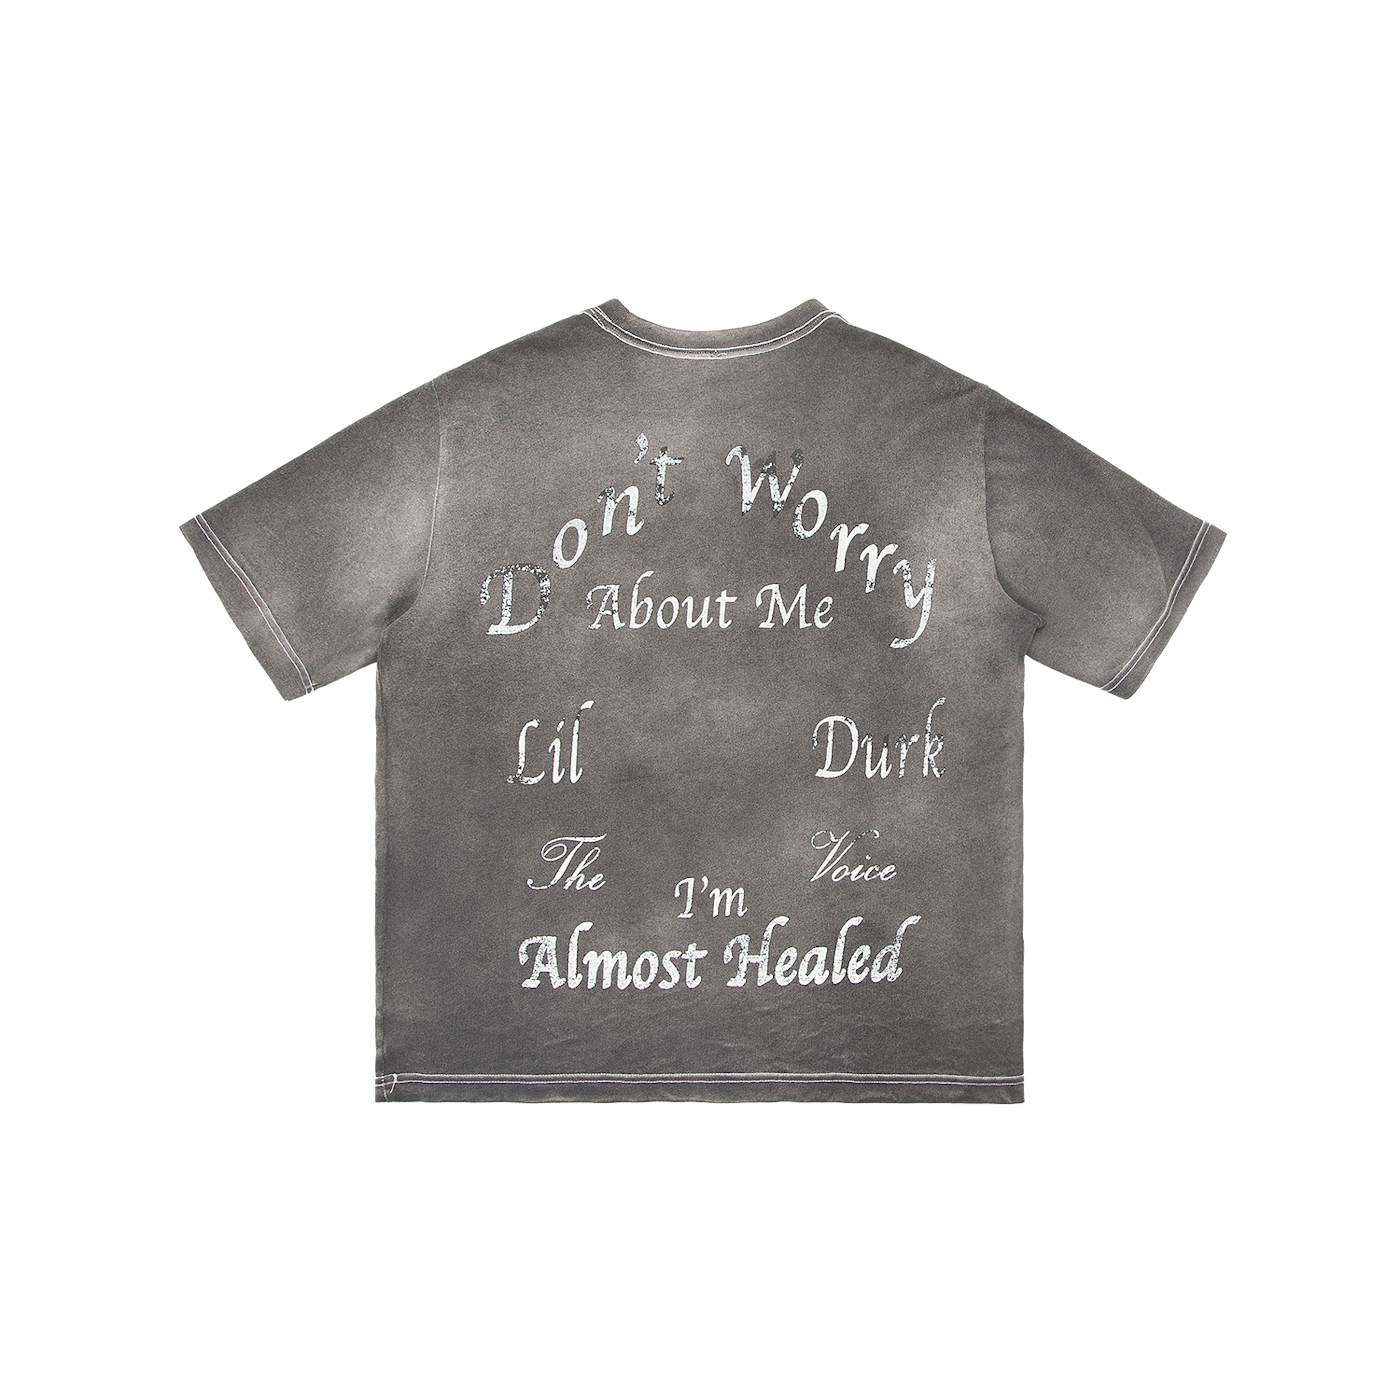 Lil Durk Don't Worry About Me Tee